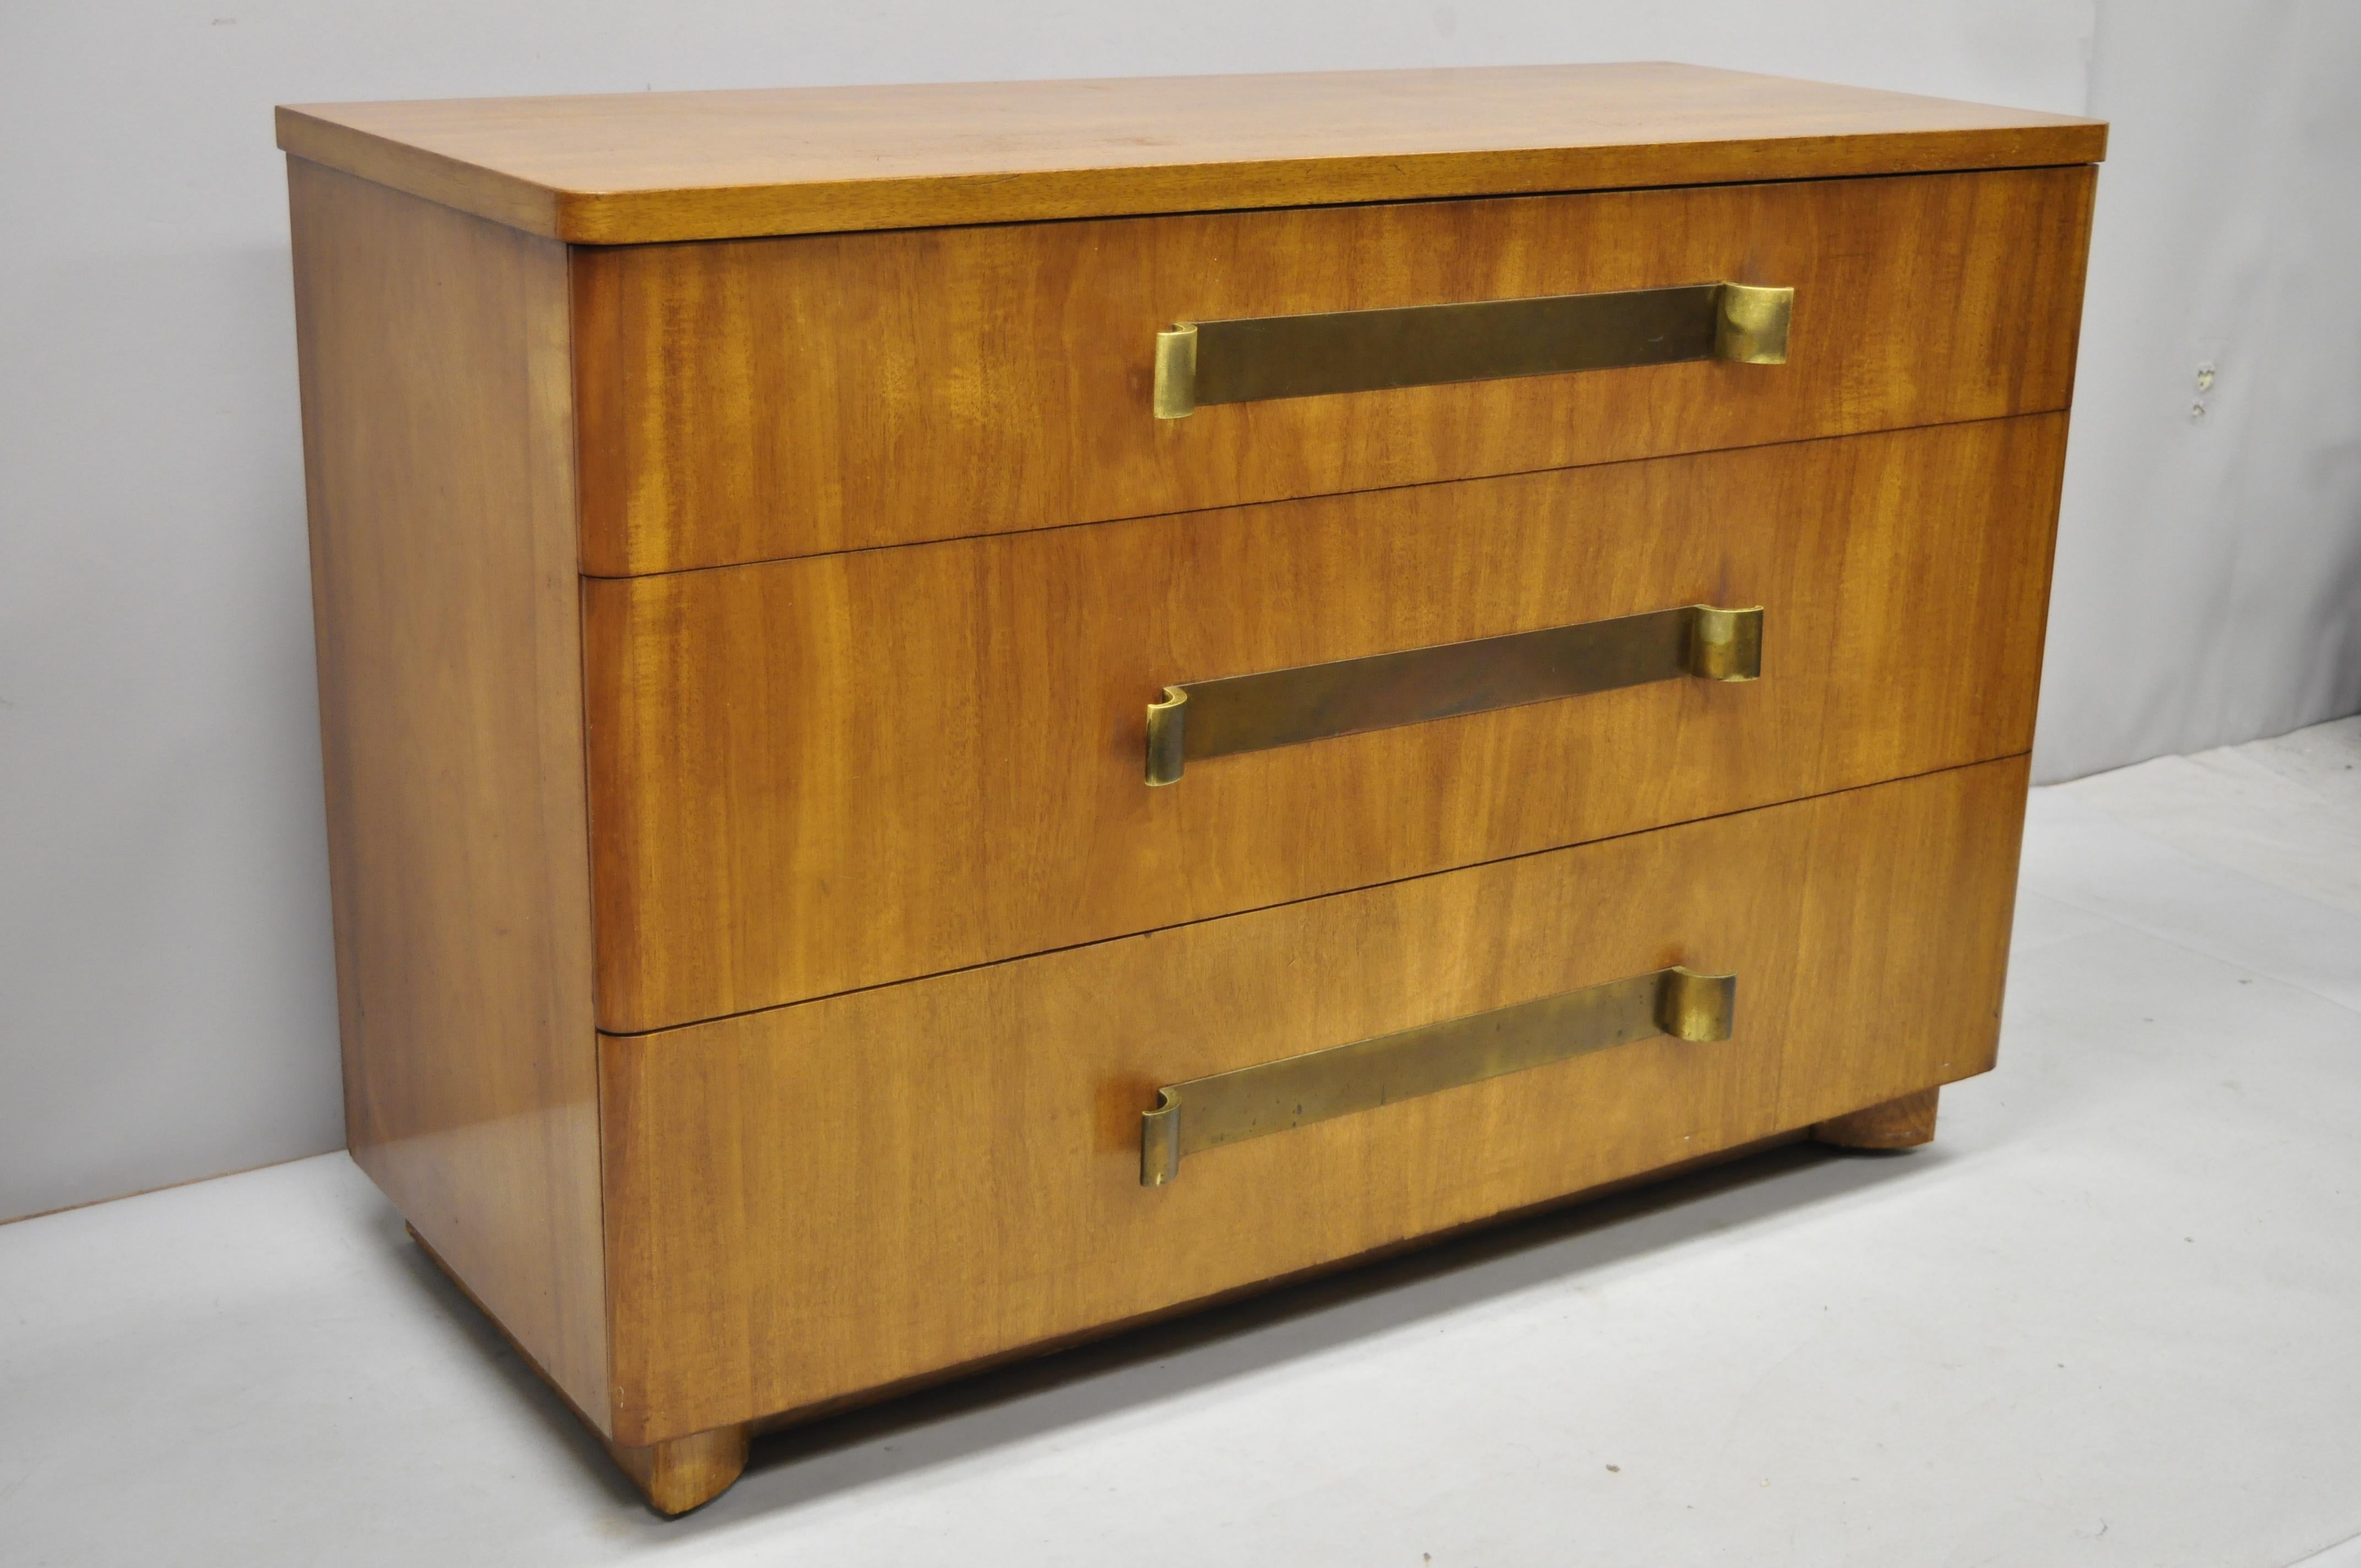 John Stuart Mid-Century Modern Art Deco birch dresser with sculpted bronze pulls. Listing includes. bronze/brass drawer pulls with wonderful patina, rolling casters, beautiful wood grain, original label, 3 drawers, clean modernist lines, quality